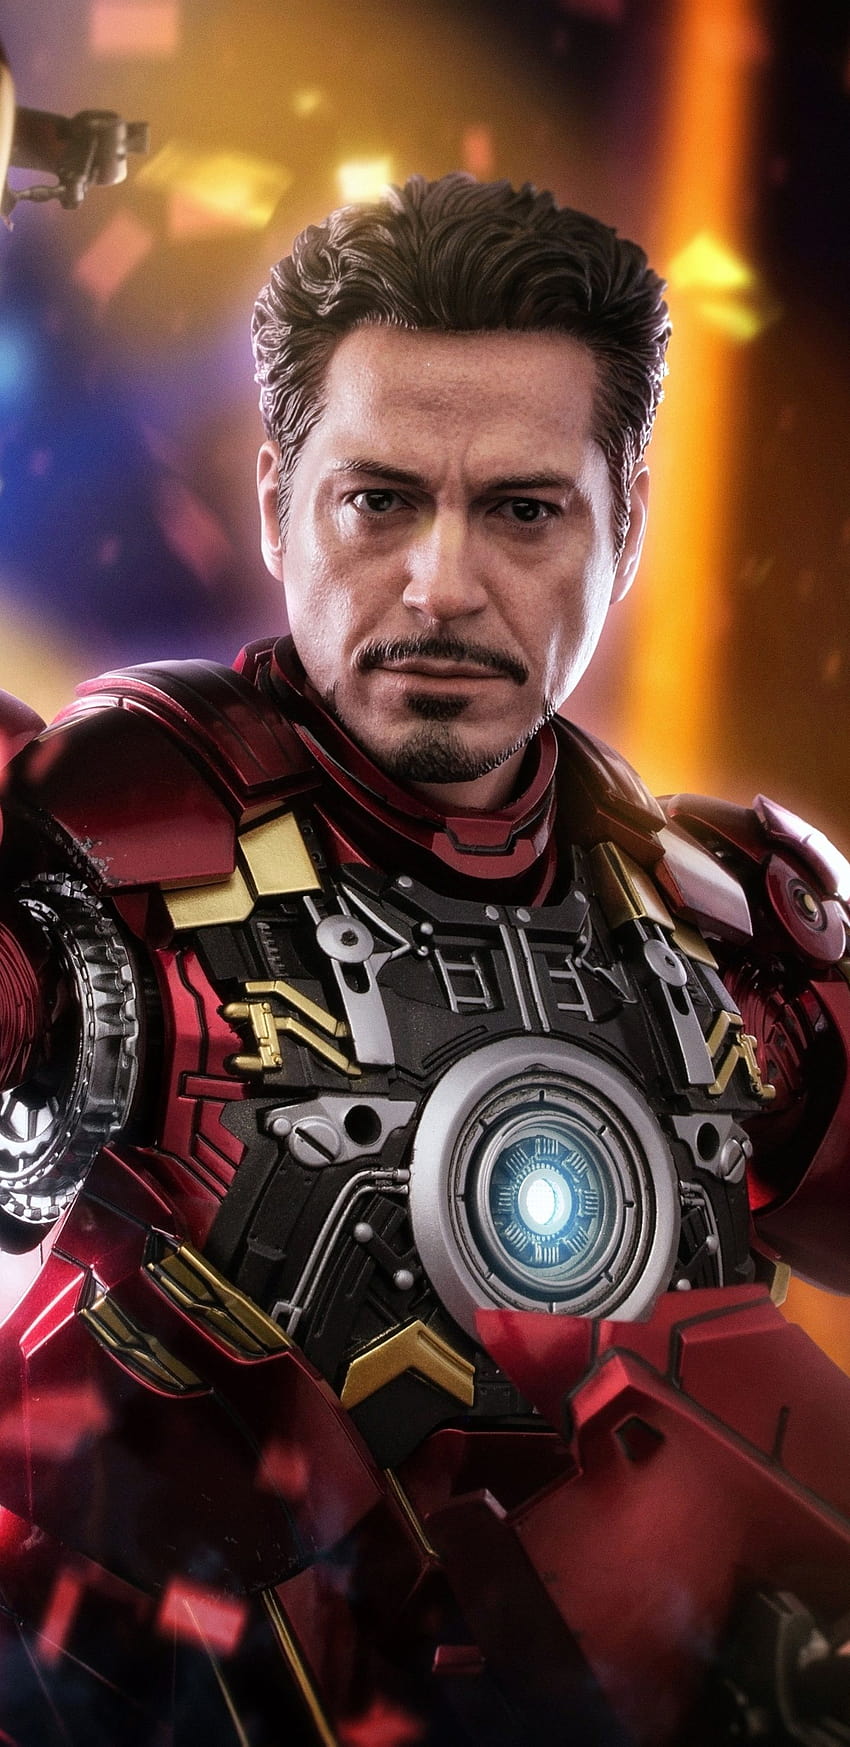 1440x2960 Suit Up Iron Man 2019 Samsung Galaxy Note 9,8, S9,S8, iron man suit up HD phone wallpaper